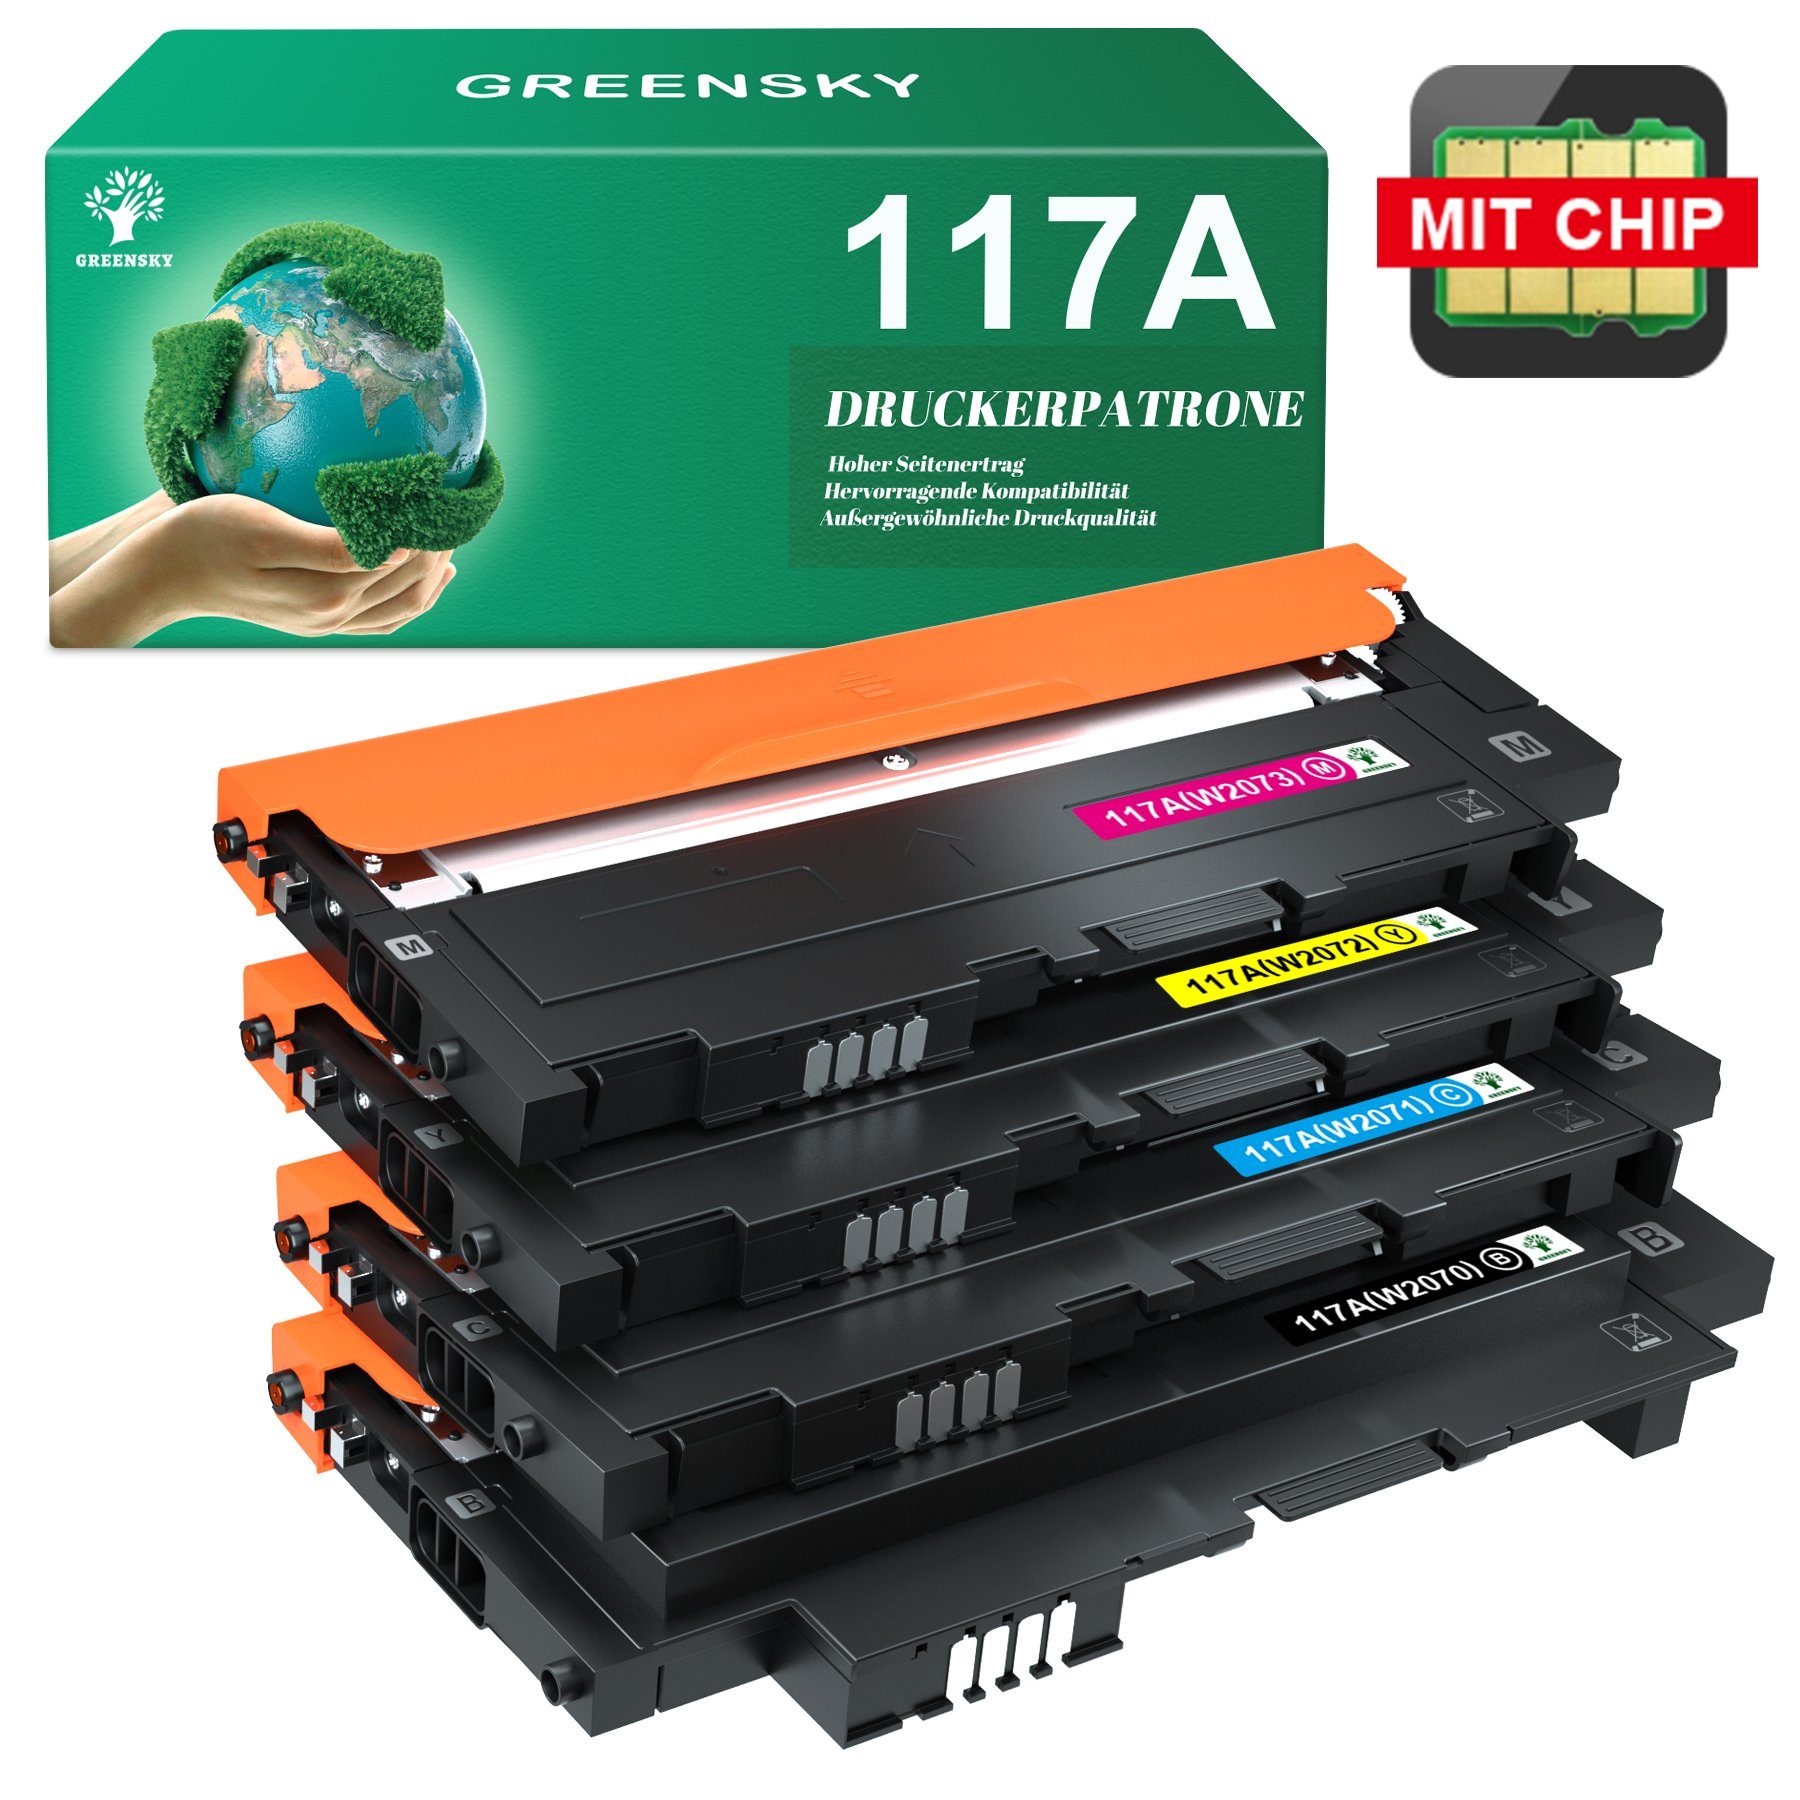 Toner für HP W2070A - W2073A Color Laser 150 a nw 179 fwg fnw 178 nwg nw  117A